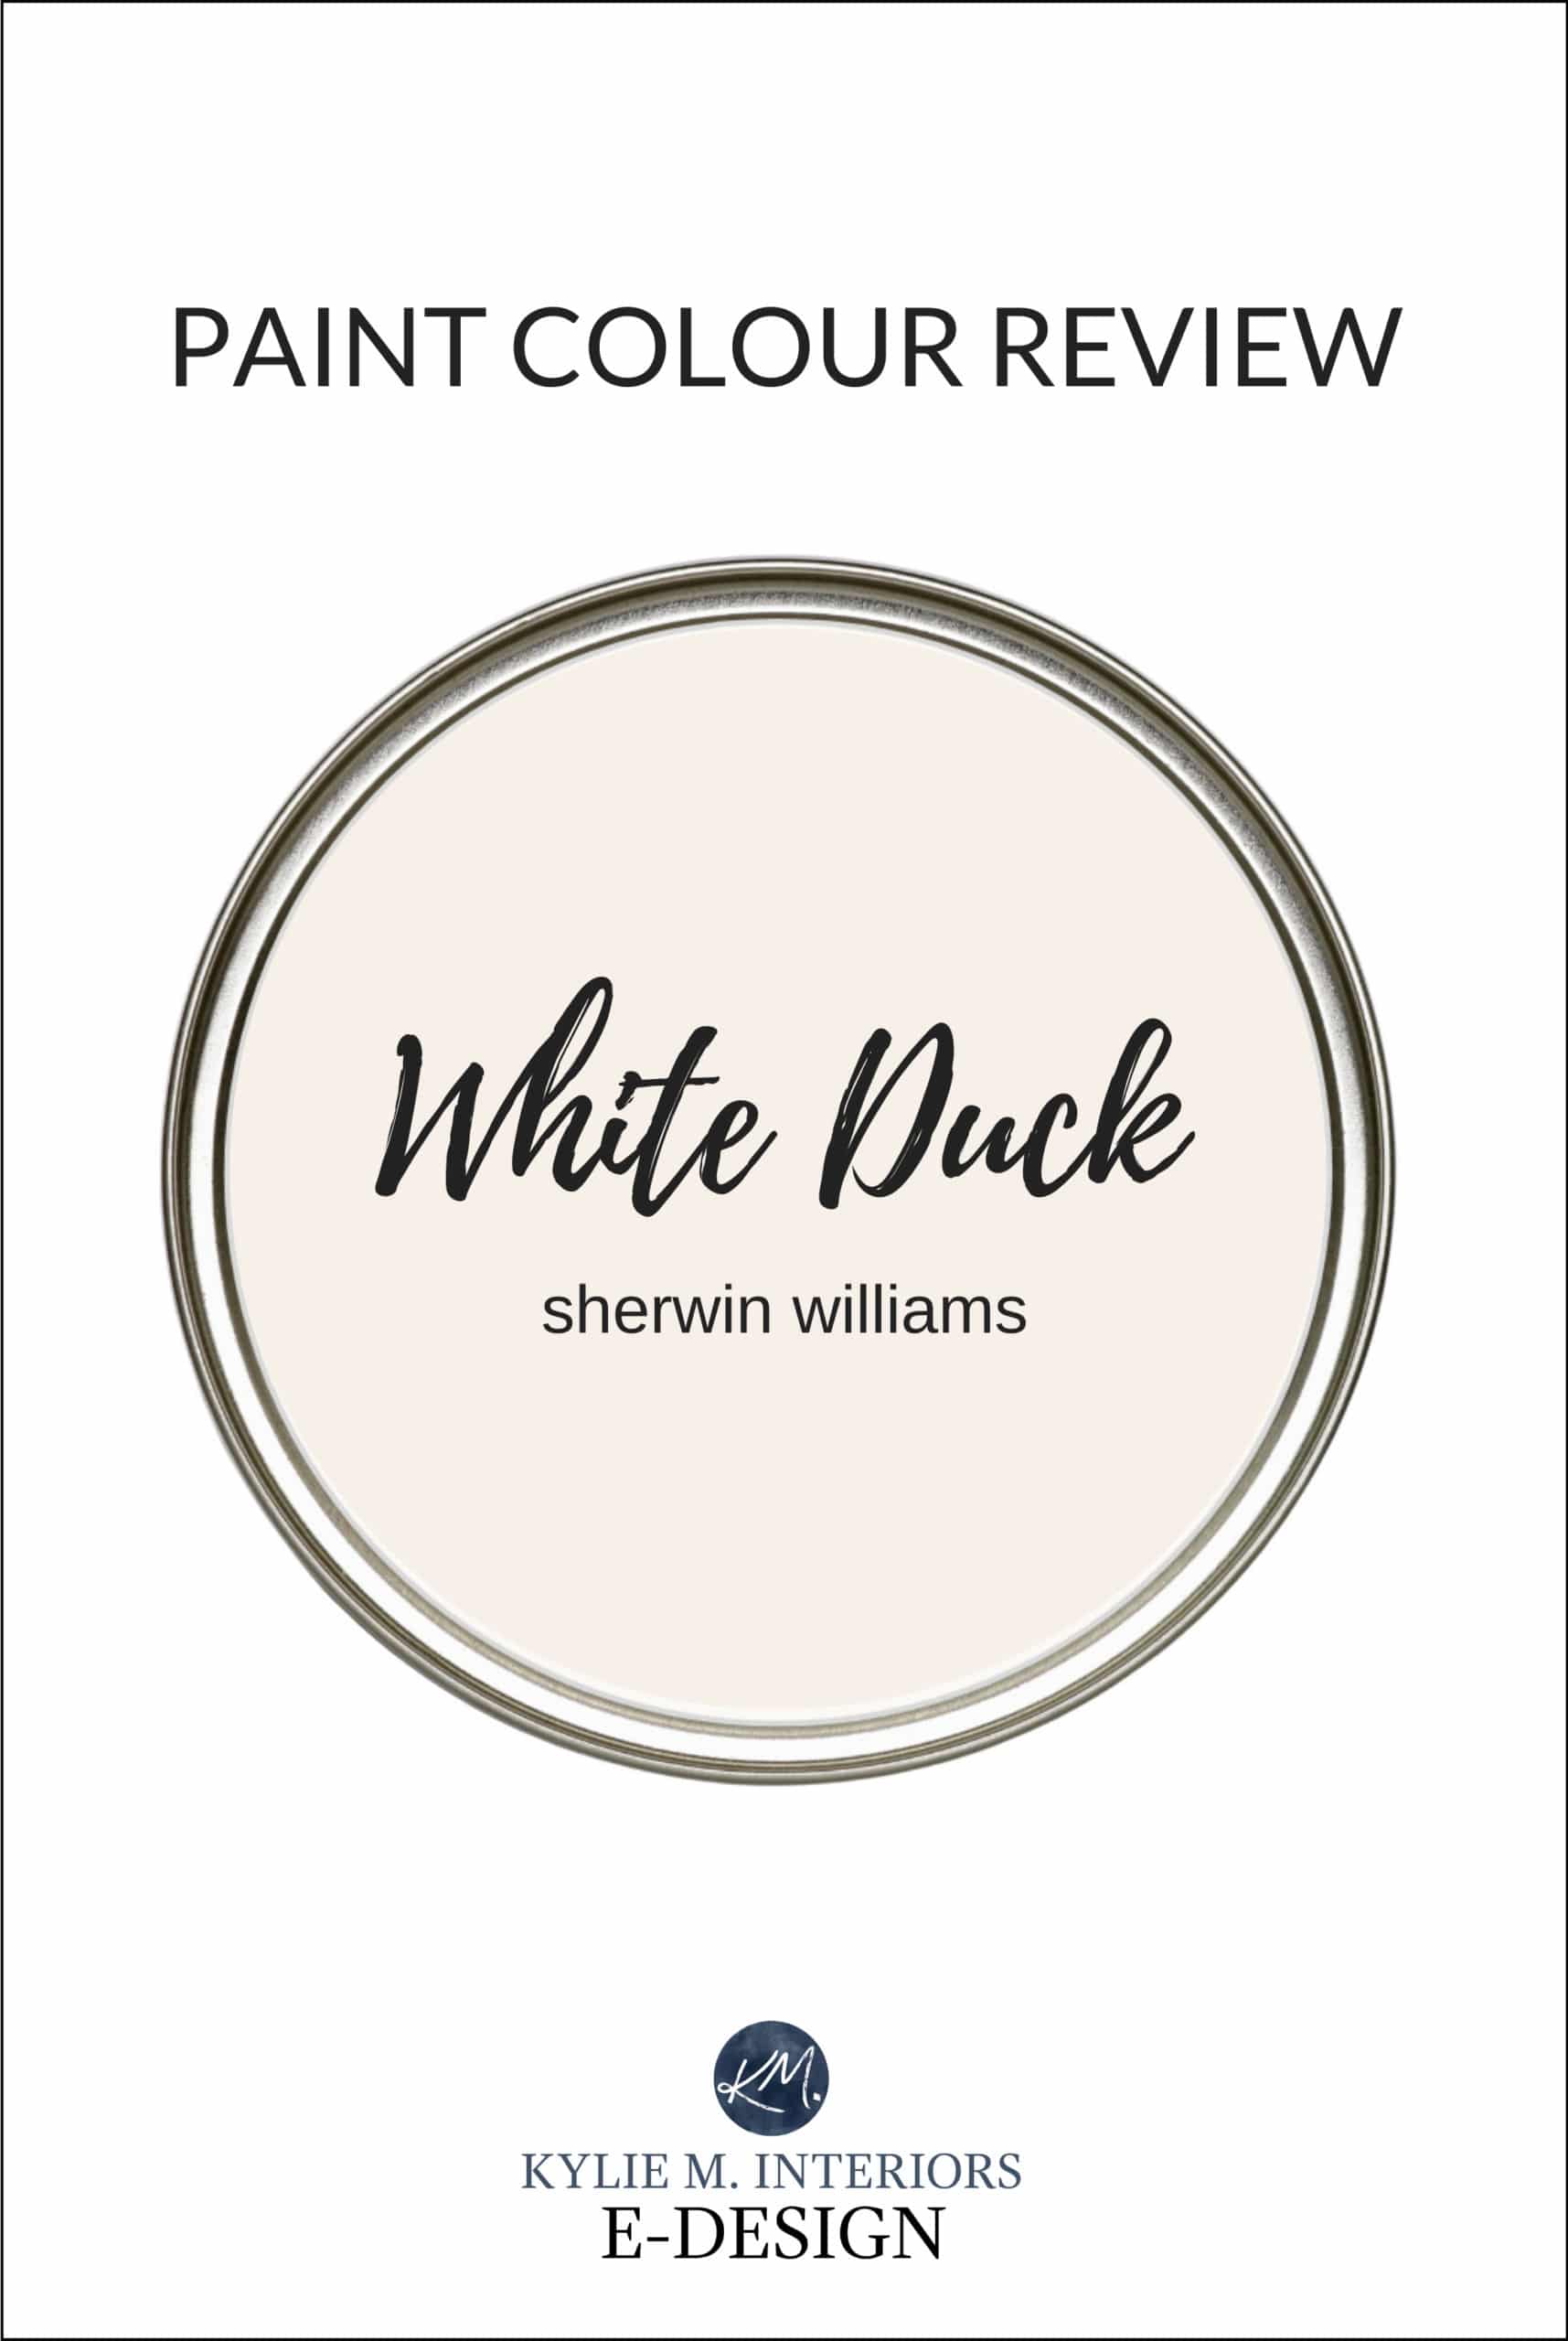 Paint Colour Review: Sherwin Williams White Duck SW 7010 - Kylie 